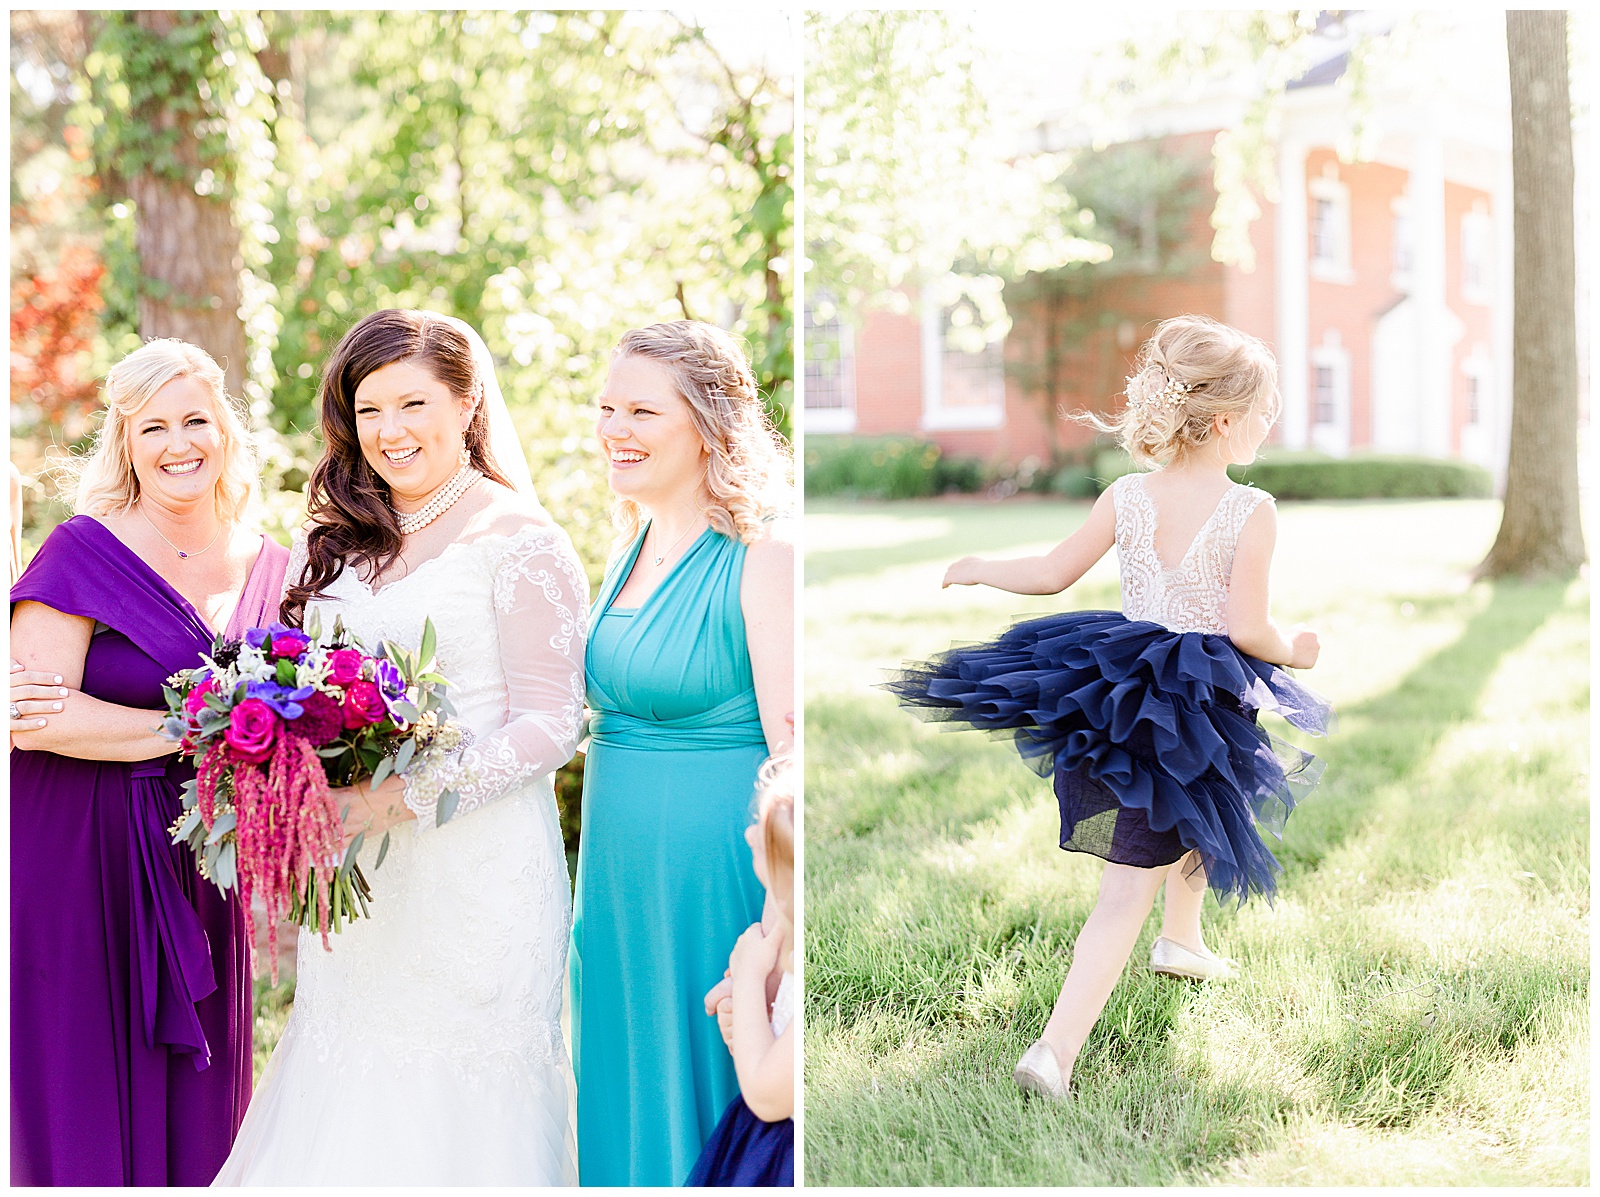 💍 cute flower girl twirling and bold color bridesmaid dresses and bouquet detail shot 👰 Bride: lace wedding dress with rhinestone belt rhinestone barrette in hair down with pearls 💍 Bright Colorful Summer City Wedding in Charlotte, NC with Taryn and Ryan | Kevyn Dixon Photography